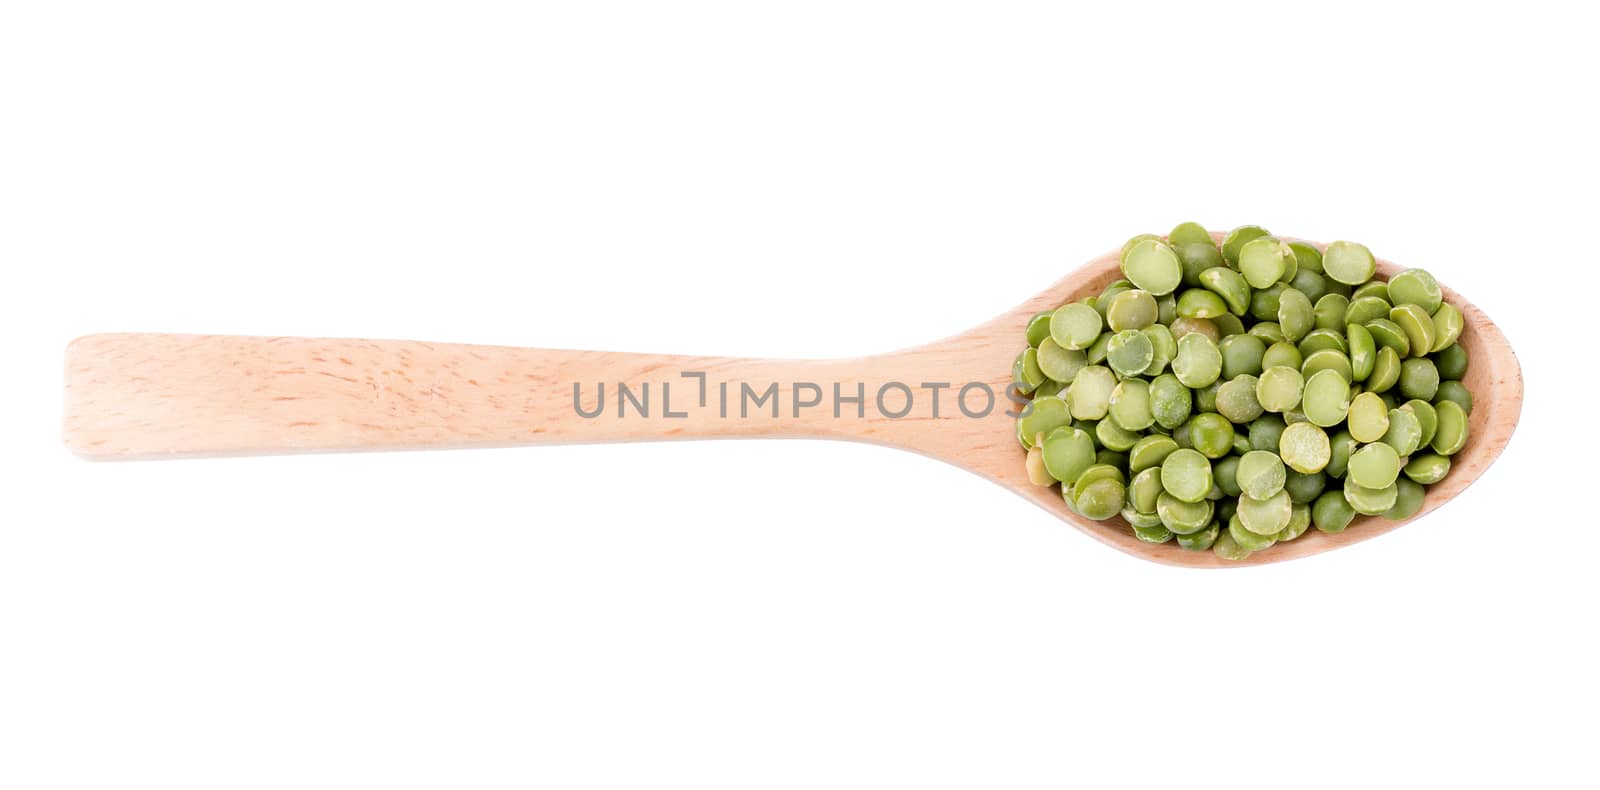 Split Green Peas on wooden spoon isolated on white background.